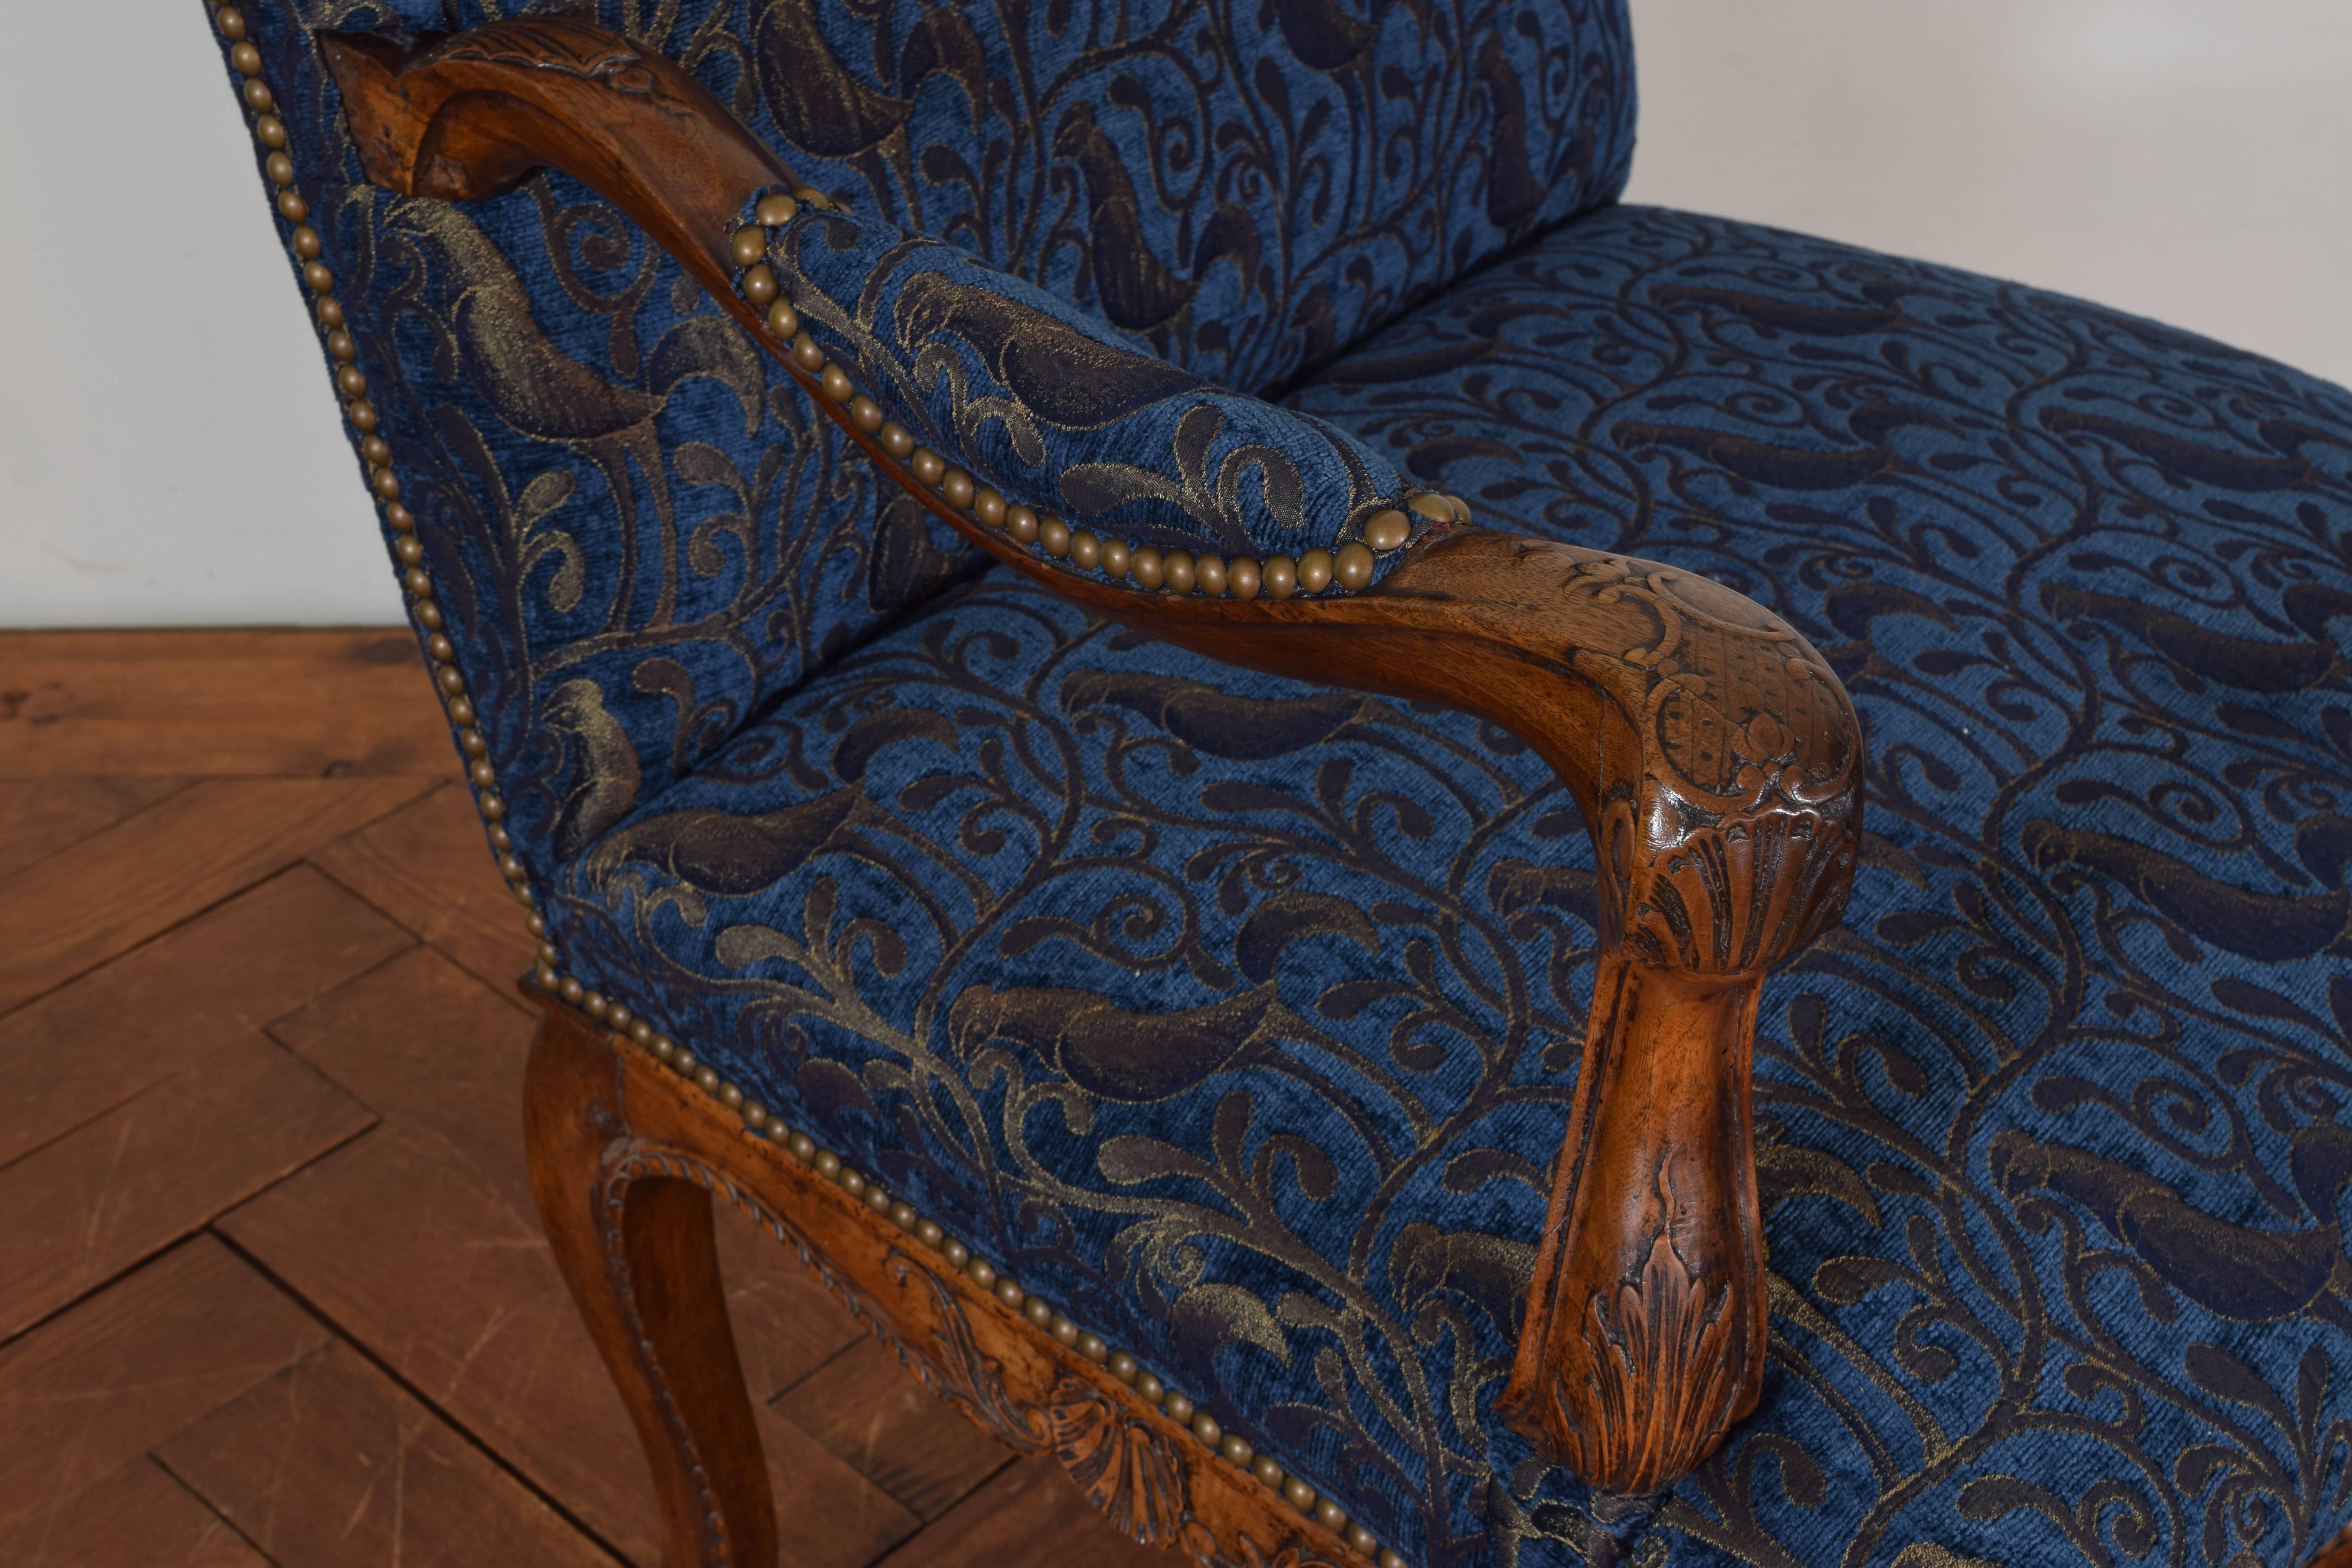 Regency French Regence Period Walnut and Upholstered Fauteuil, Early 18th Century